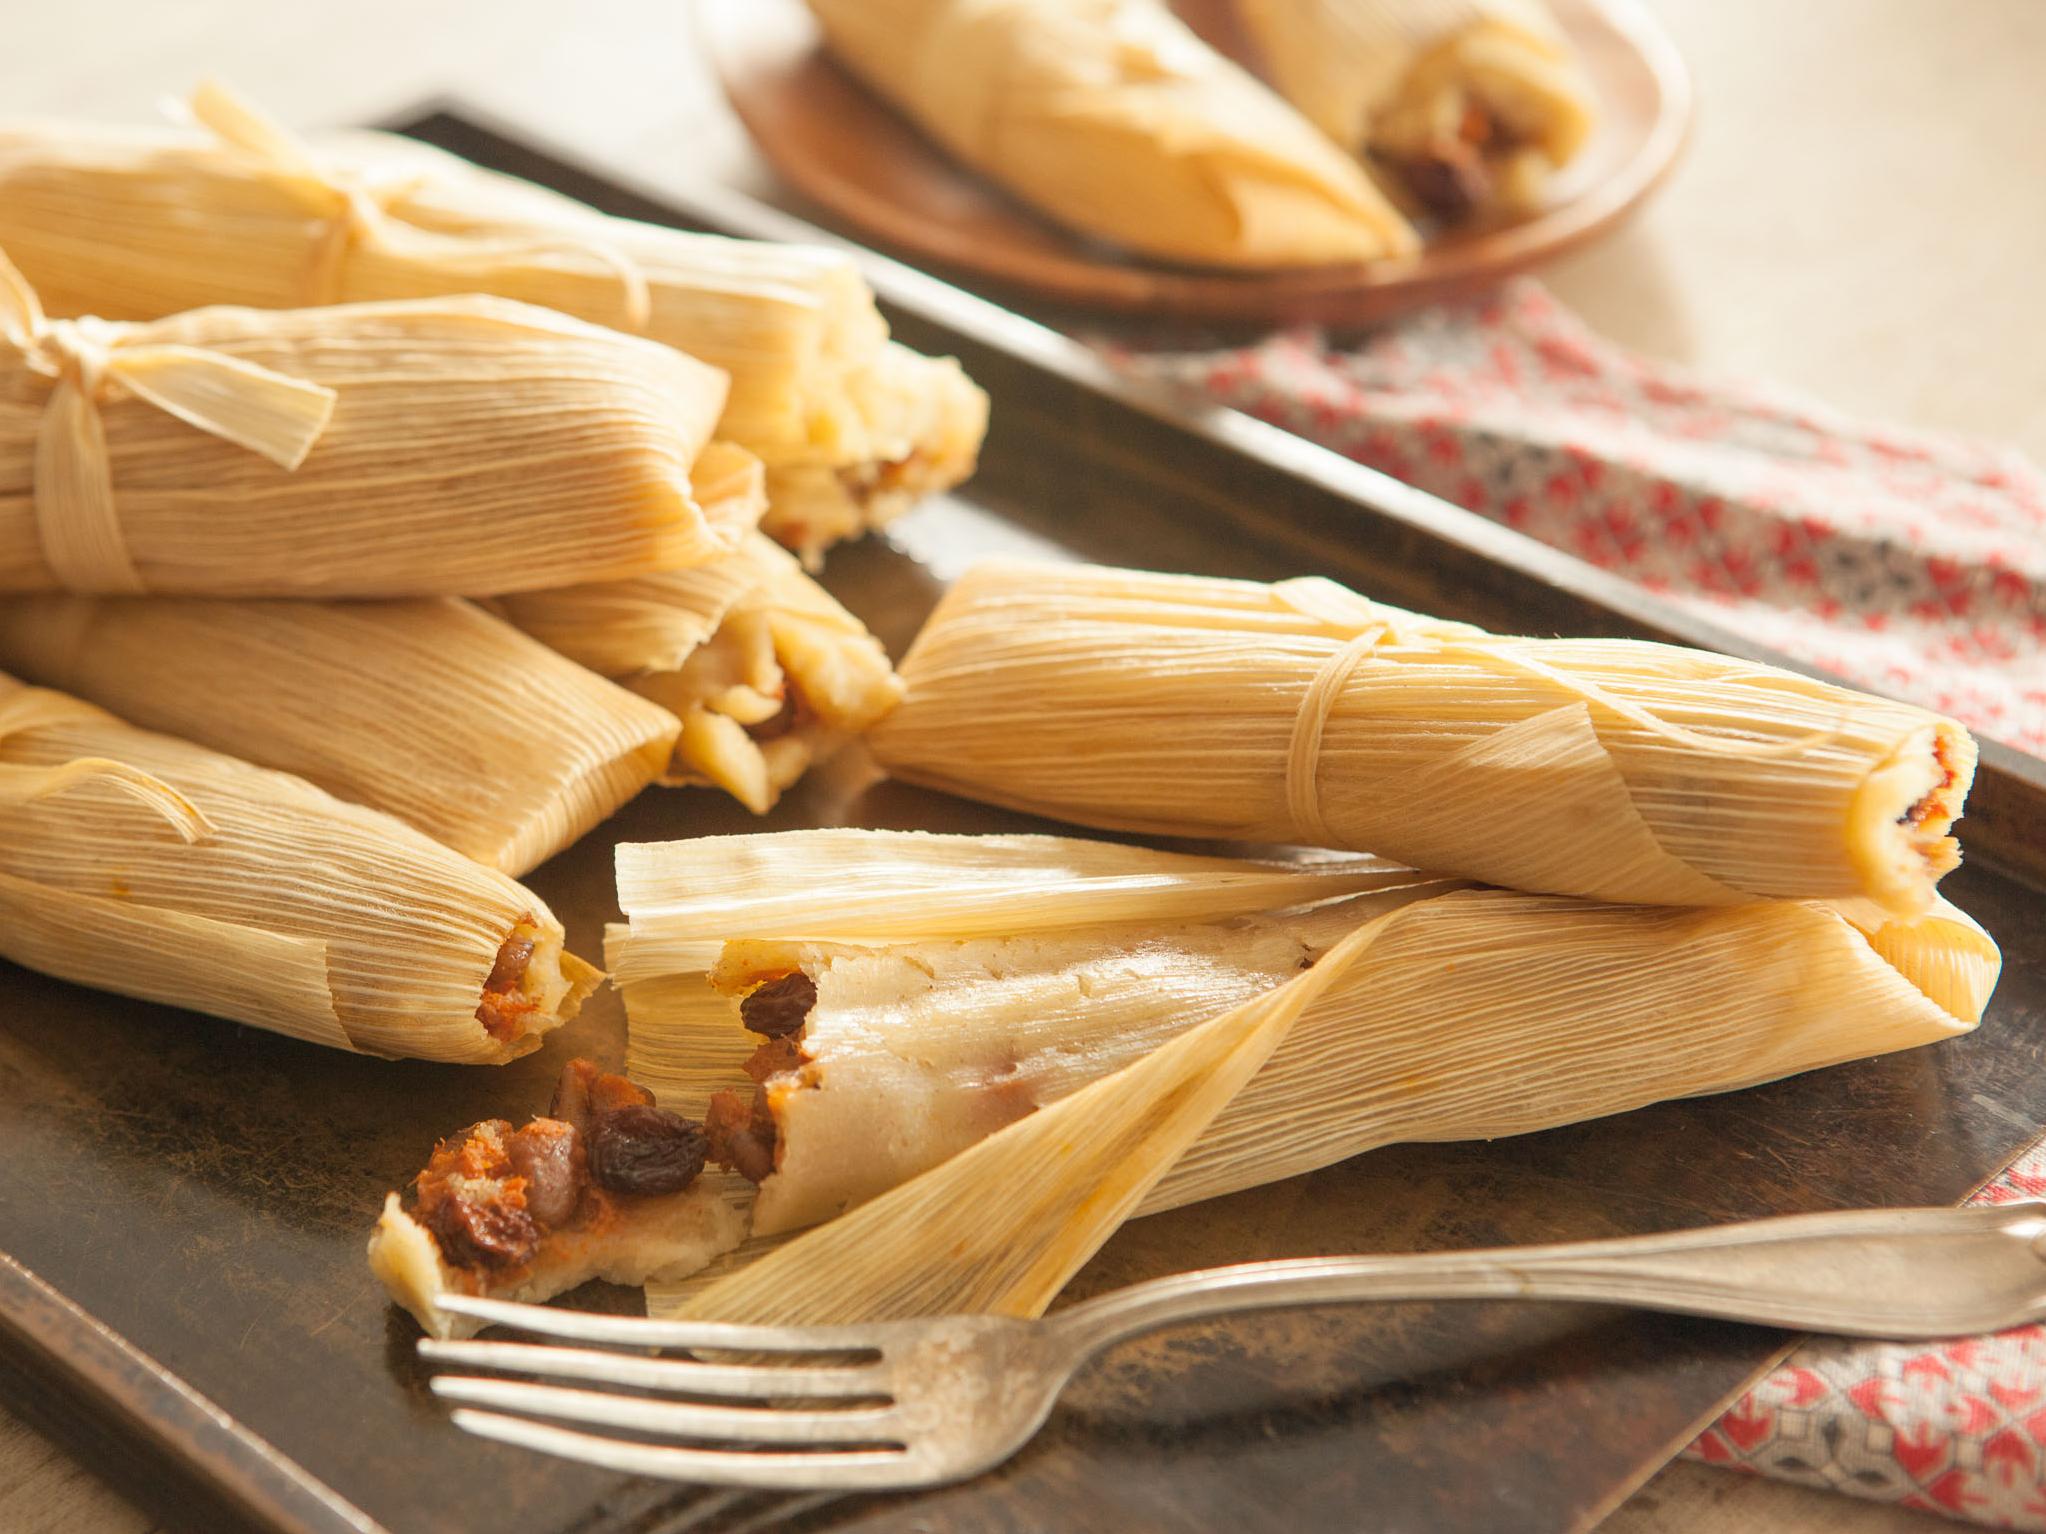  Delightful tamales filled with yam, pecans and raisins.